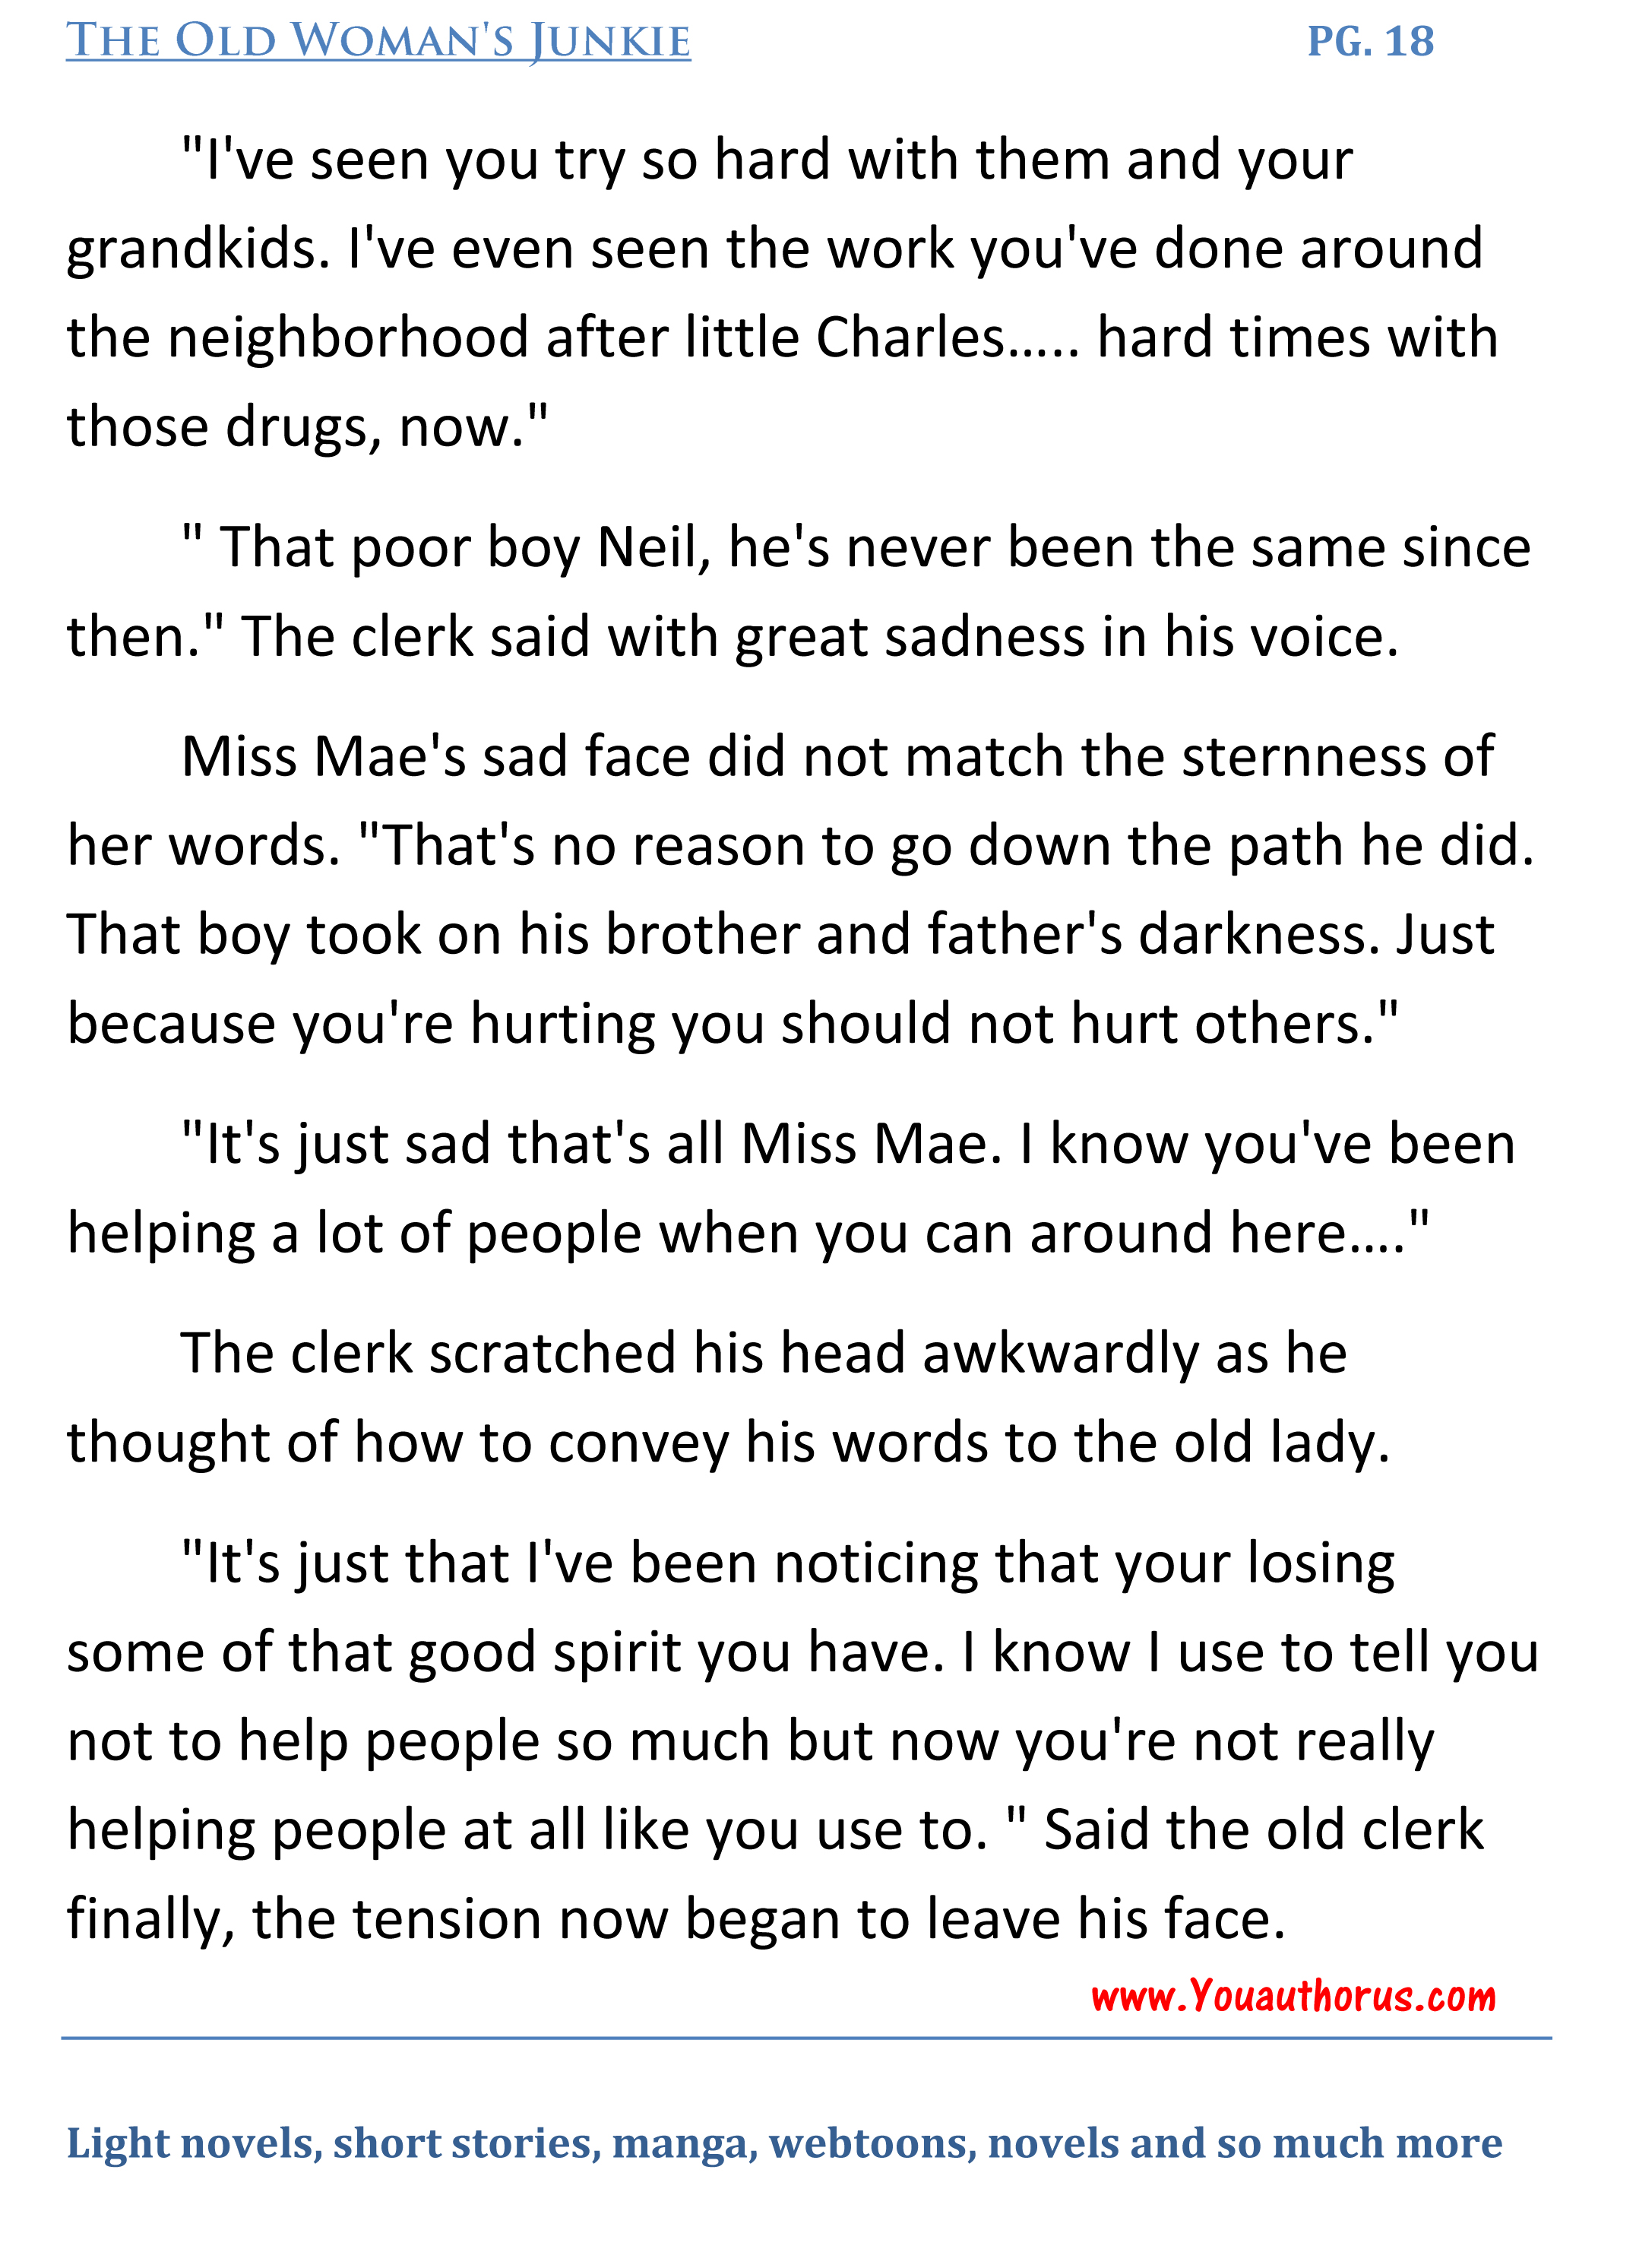 The Old Woman's Junkie(publishing 1)-18 copy